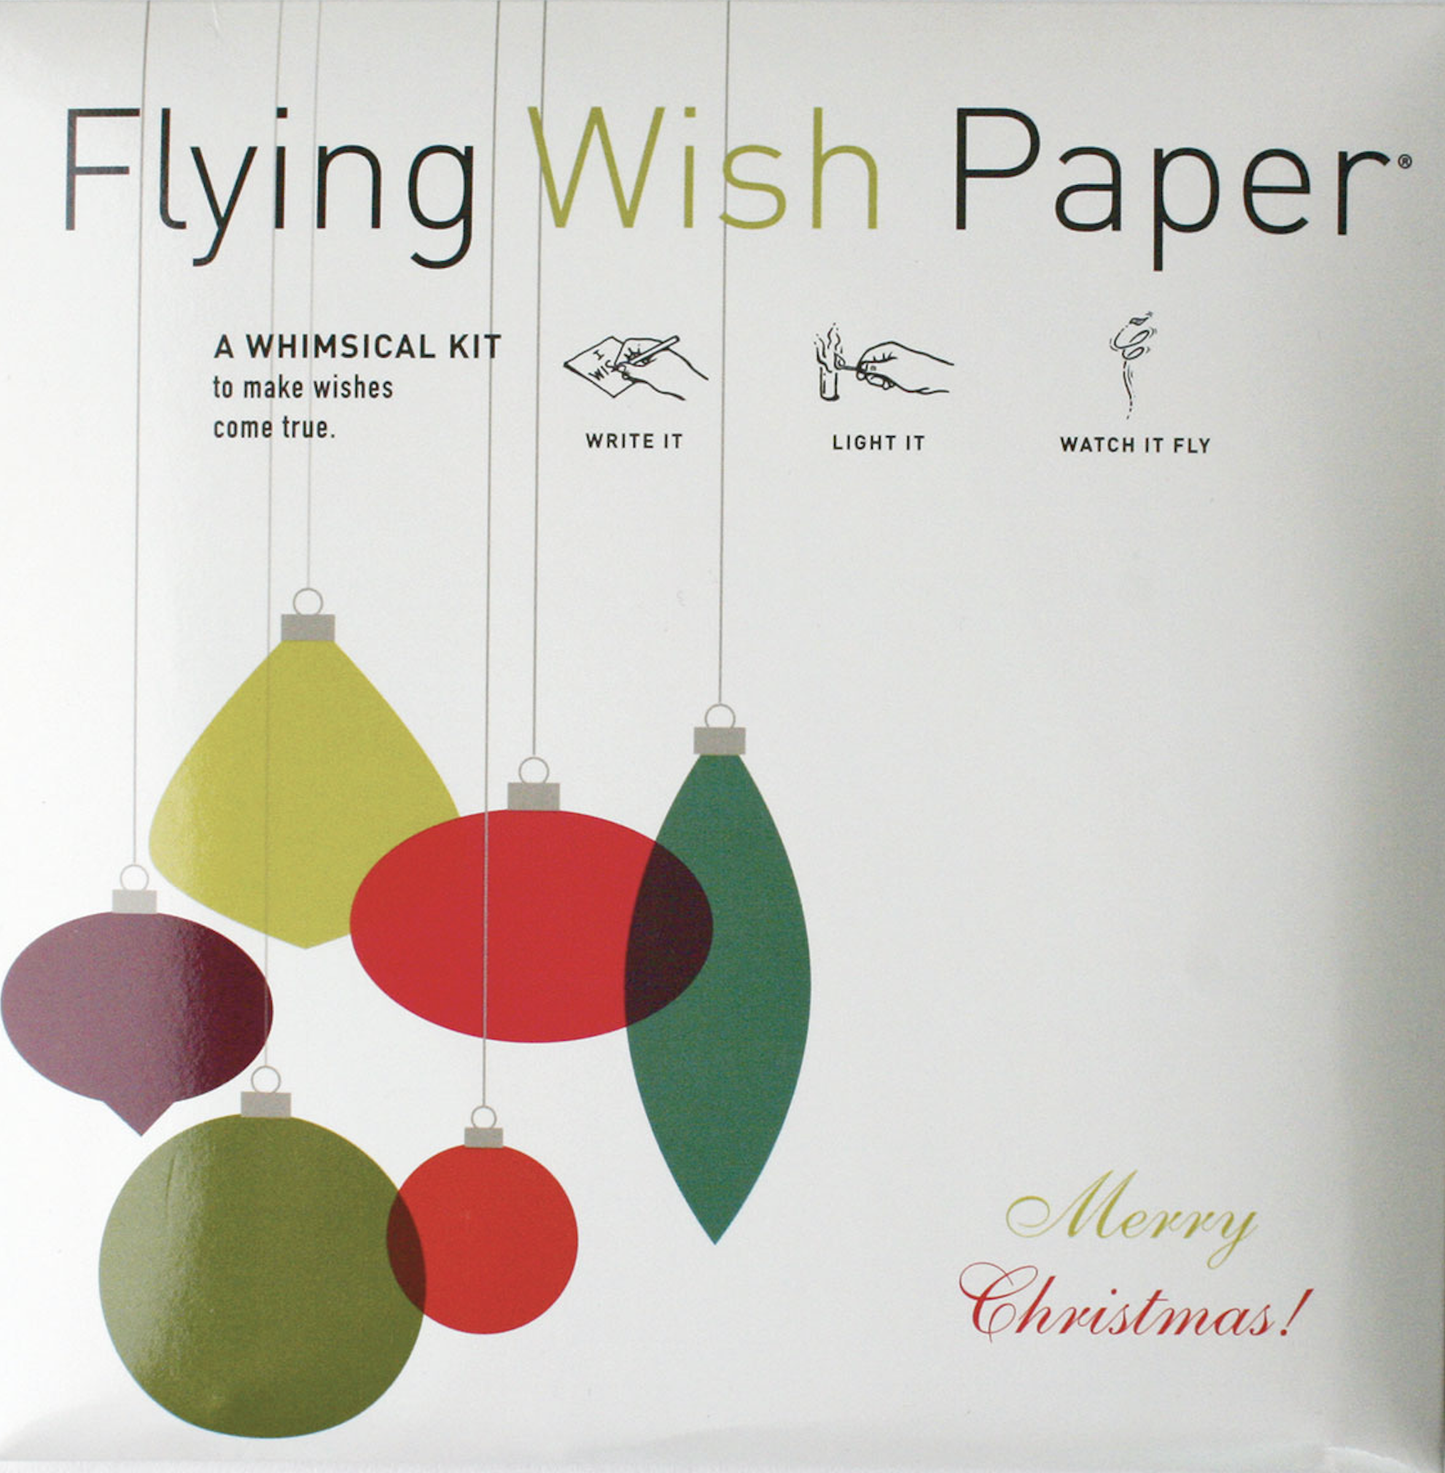 FLYING WISH PAPER 'Retro Ornament' / Large Kit with 50 Wishes + accessories